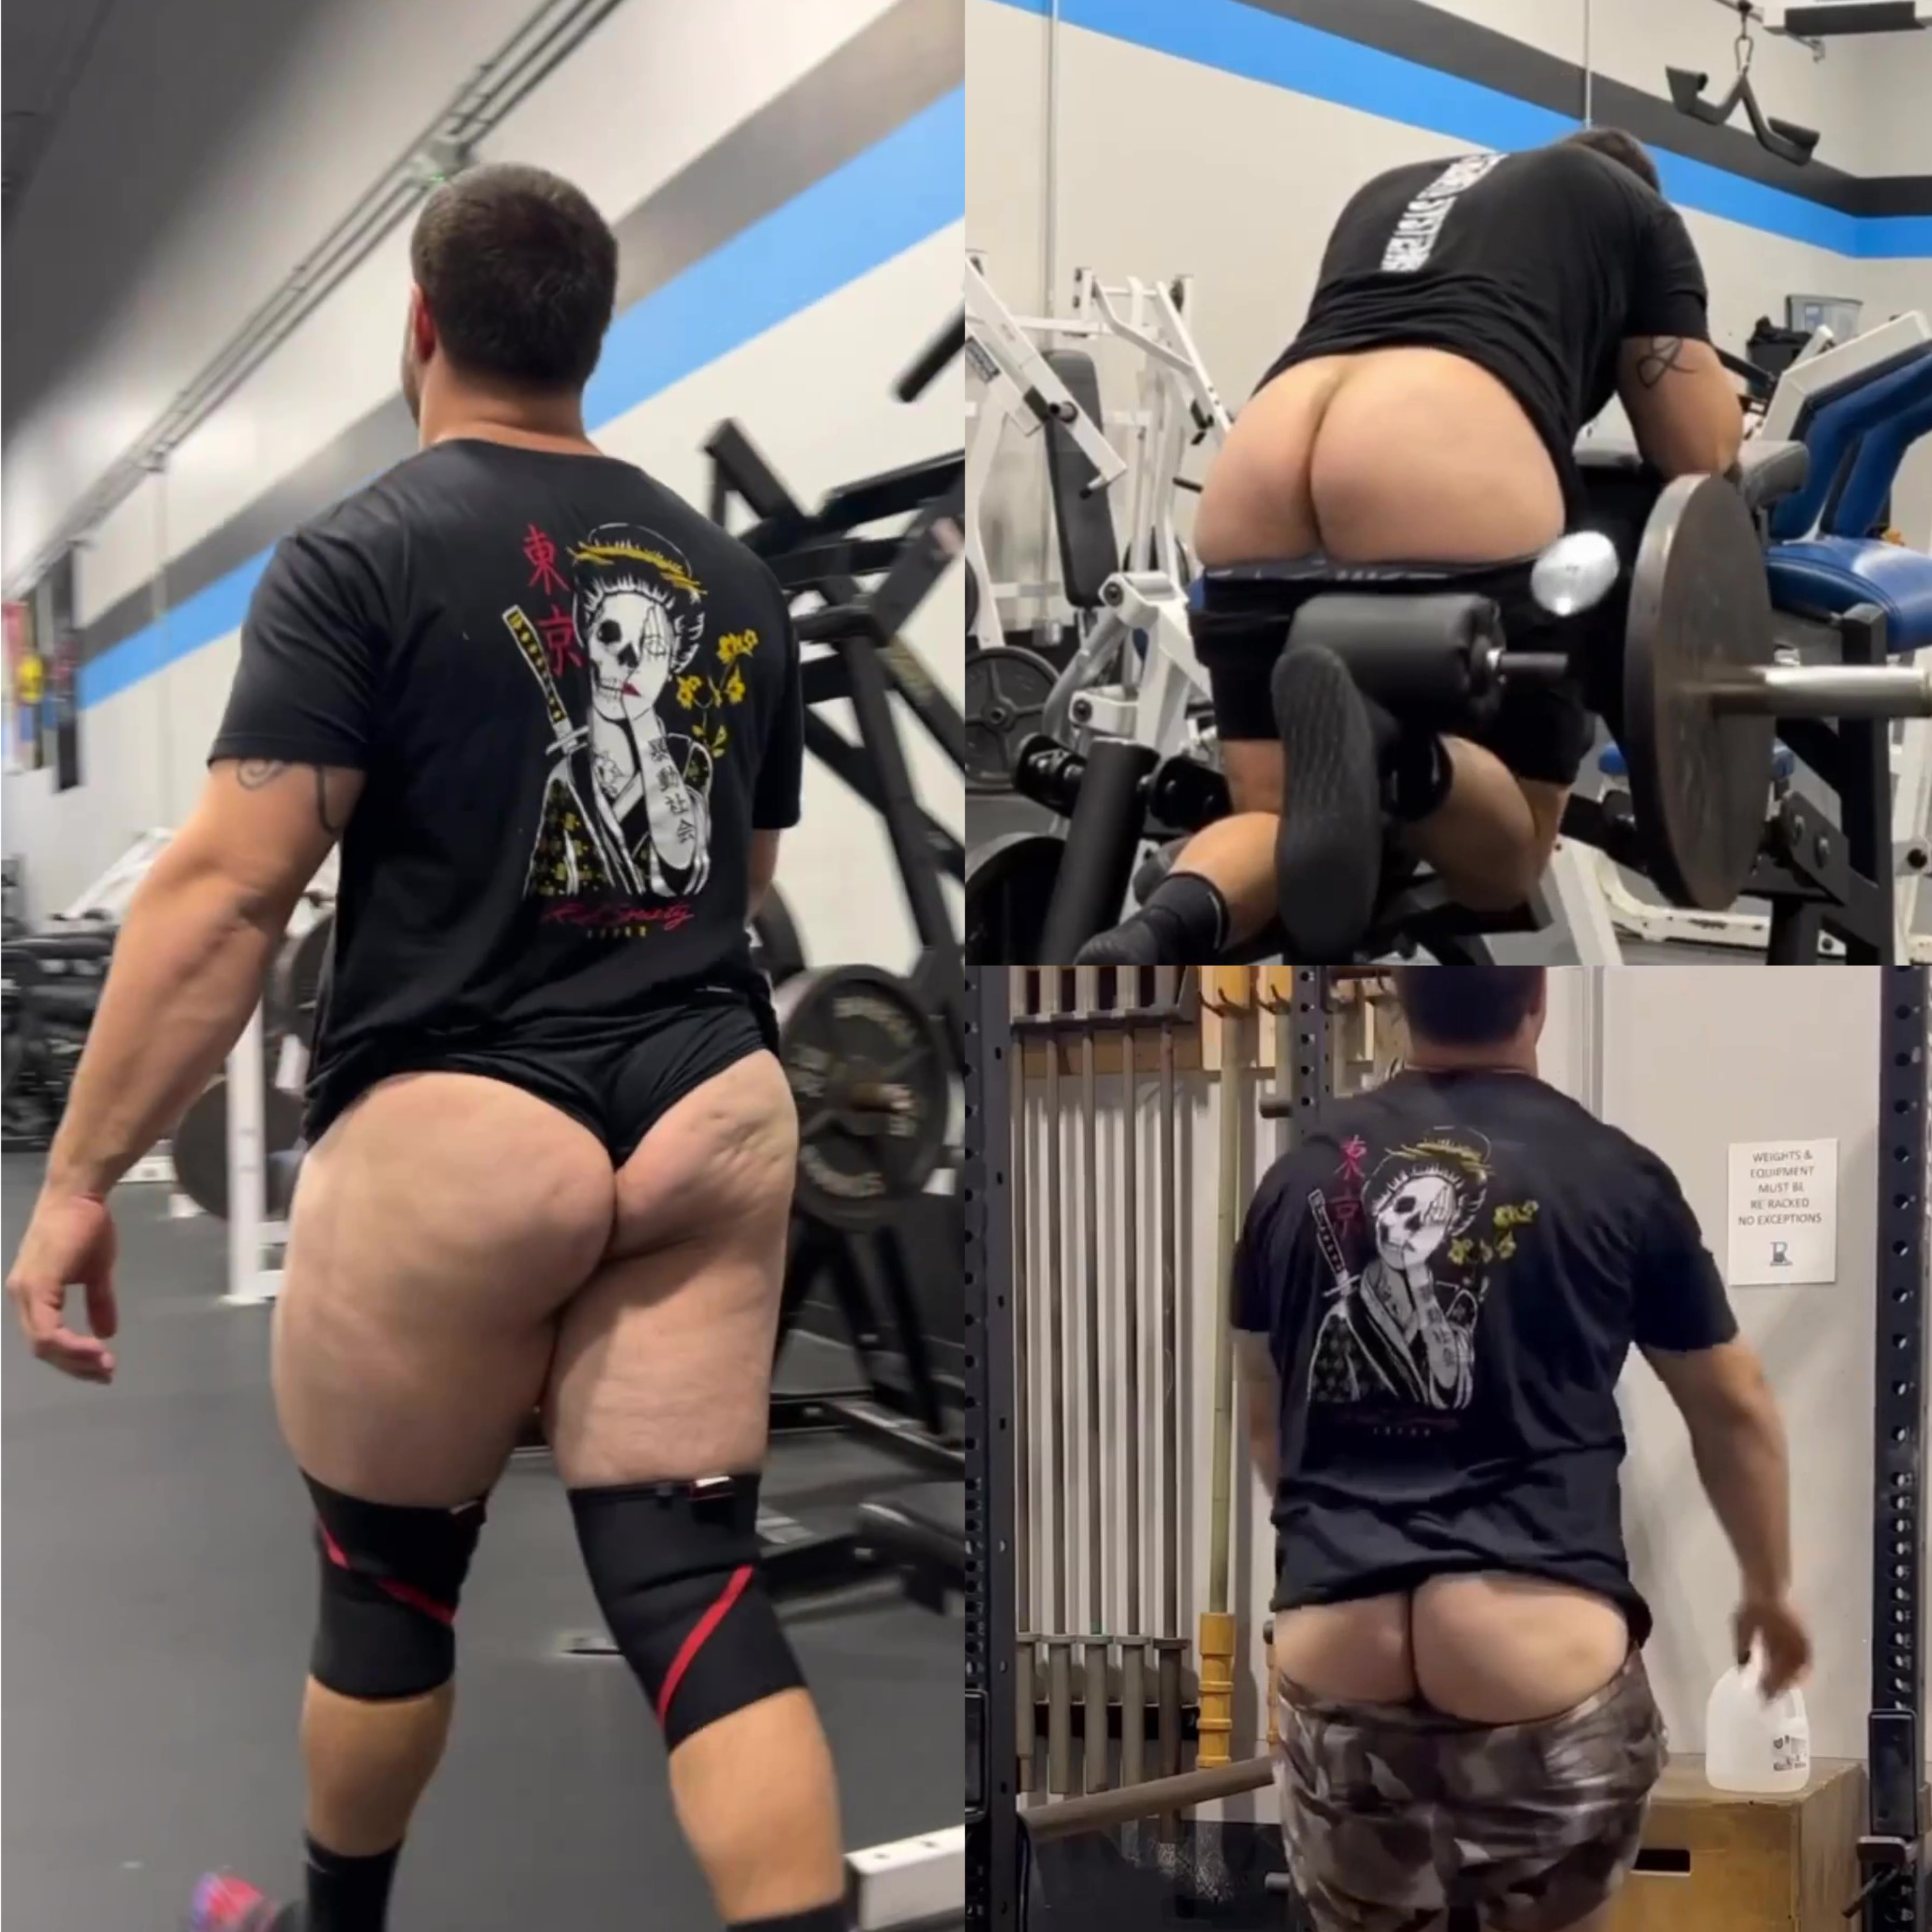 Big Cheeks Fitness Instructor Loves Showing Ass!